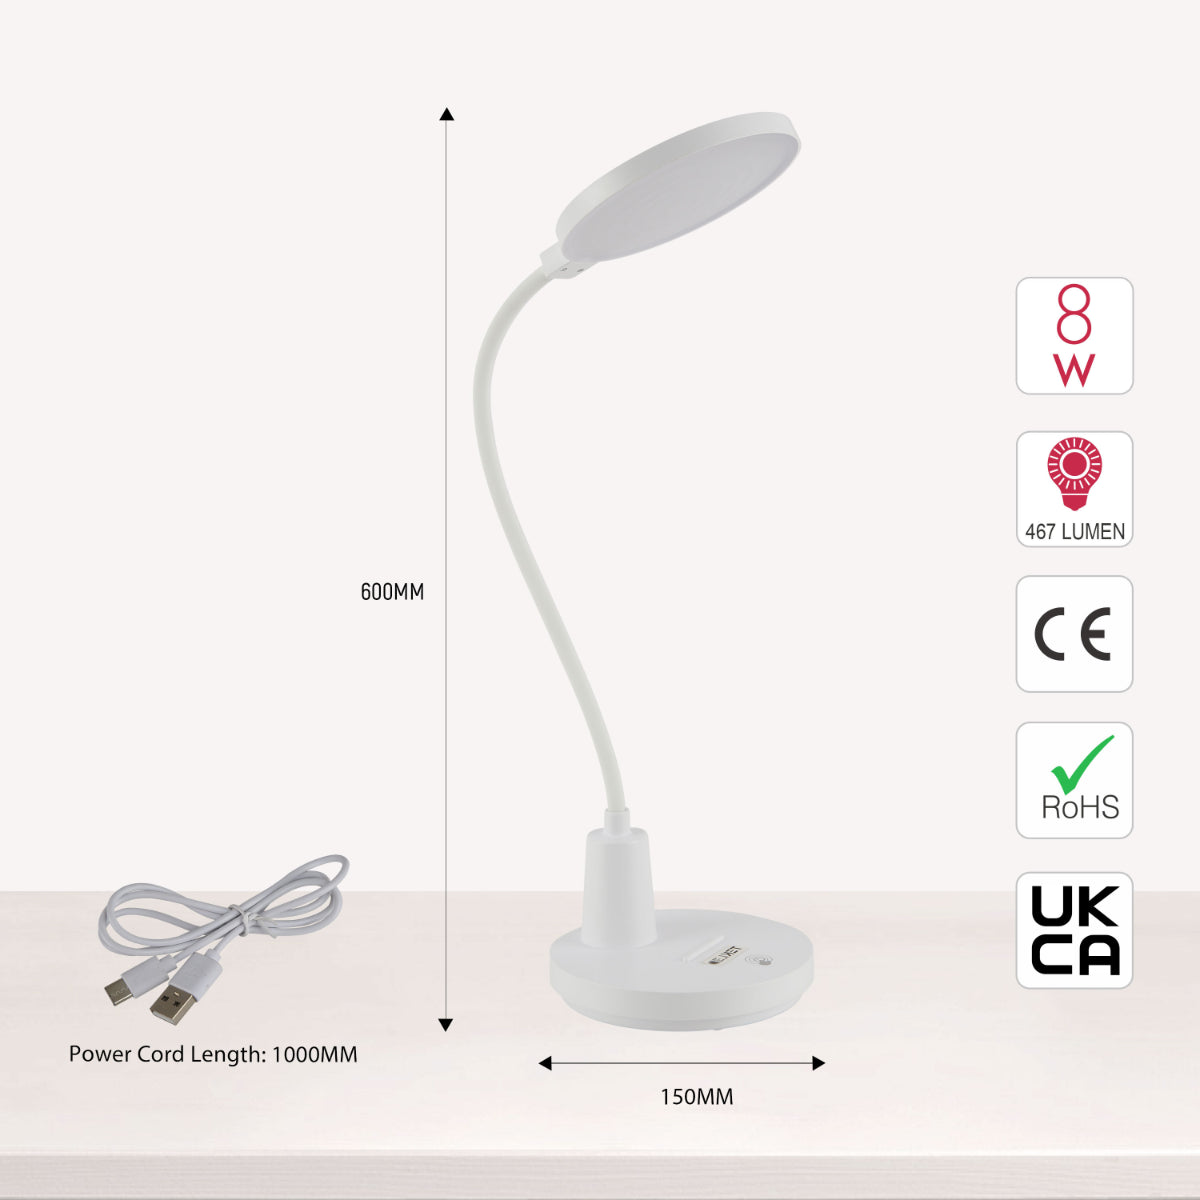 Size and certifications of Sleek Rechargeable Gooseneck LED Desk Lamp 130-03759